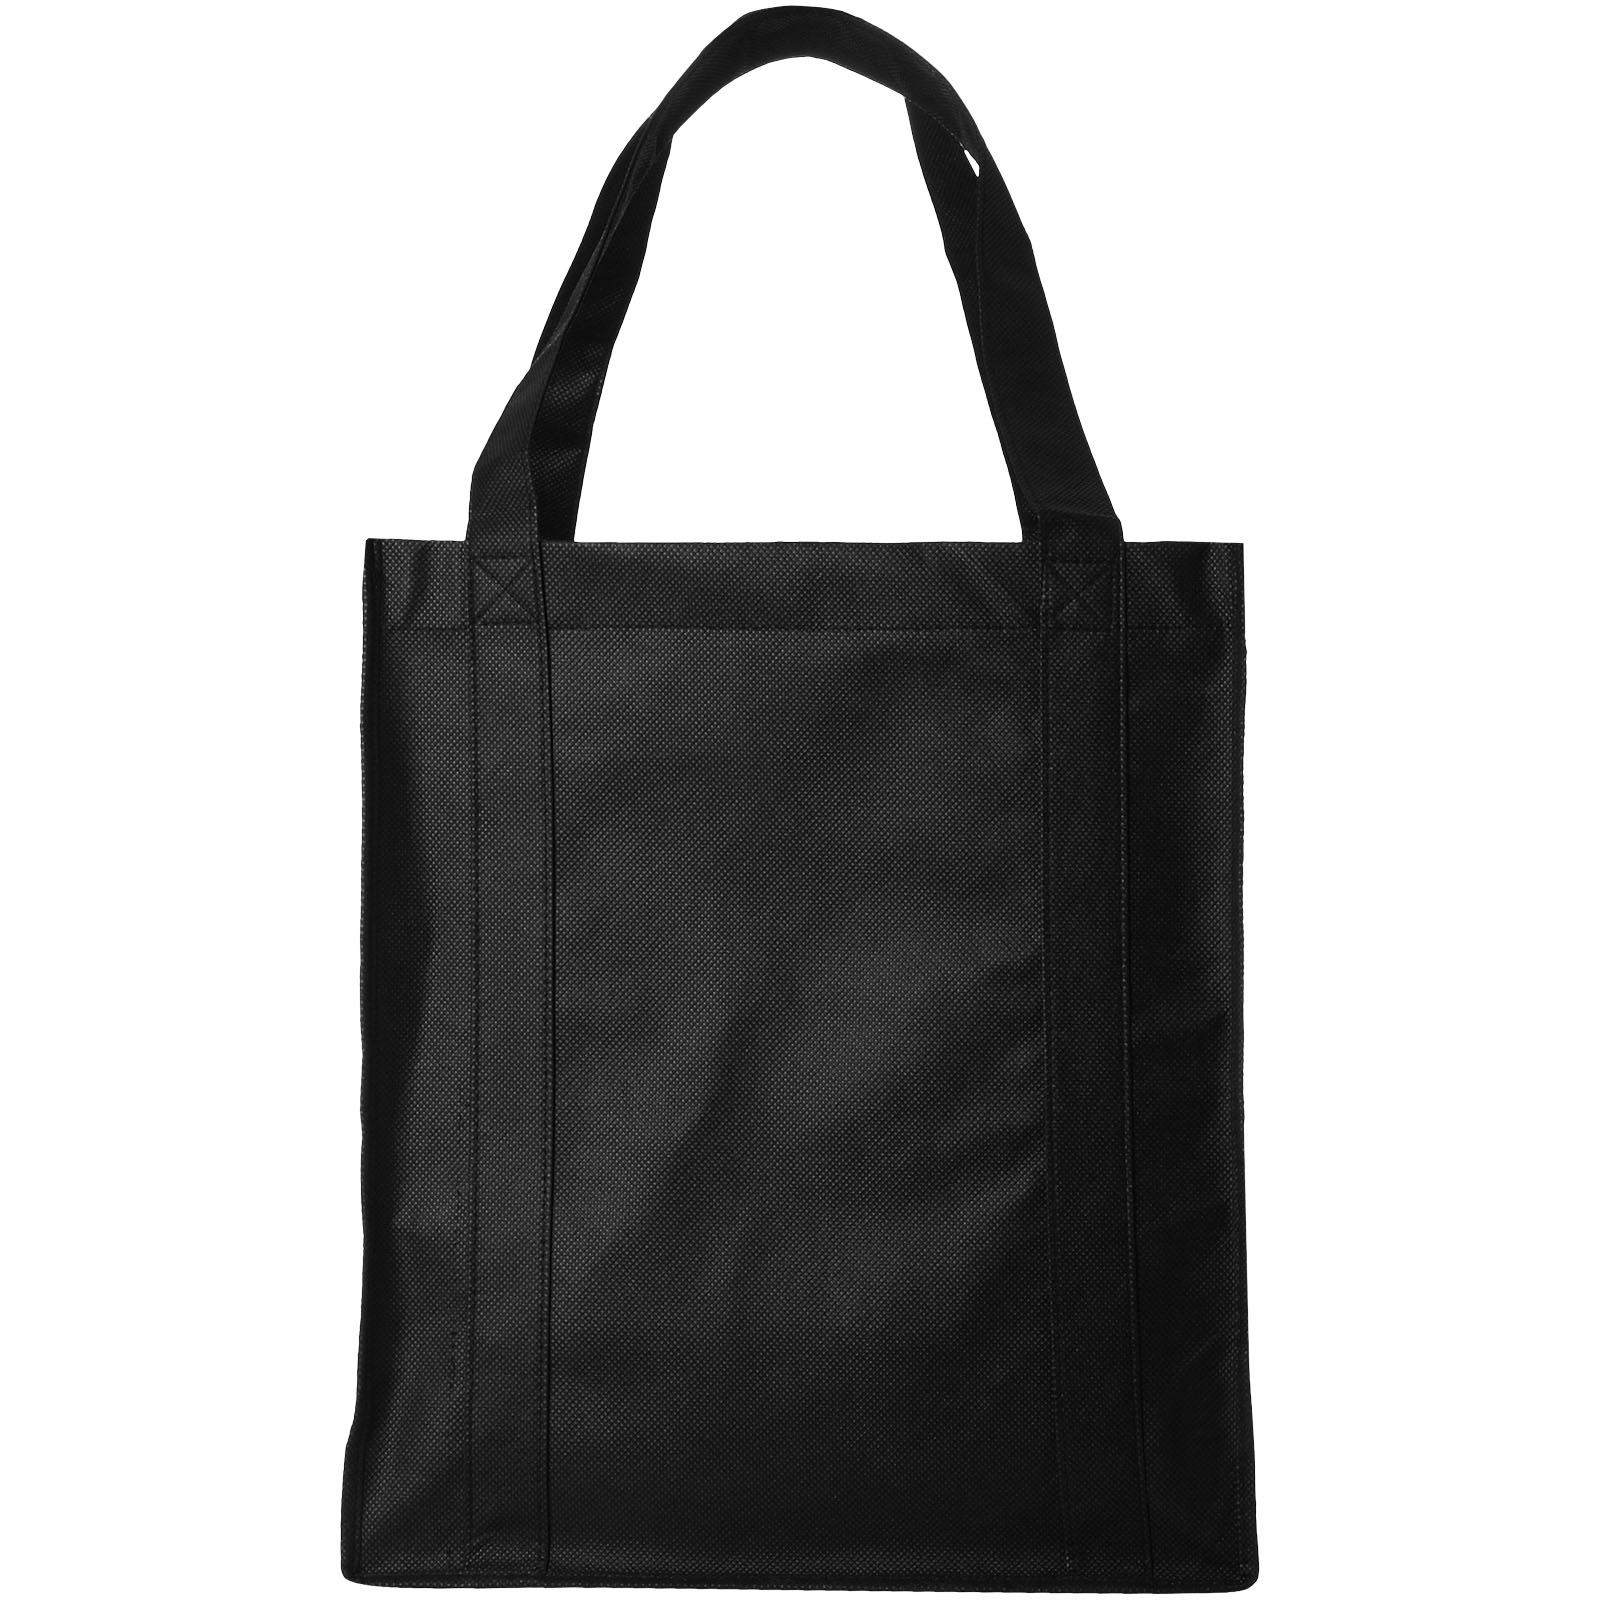 Advertising Shopping & Tote Bags - Liberty bottom board non-woven tote bag 29L - 1